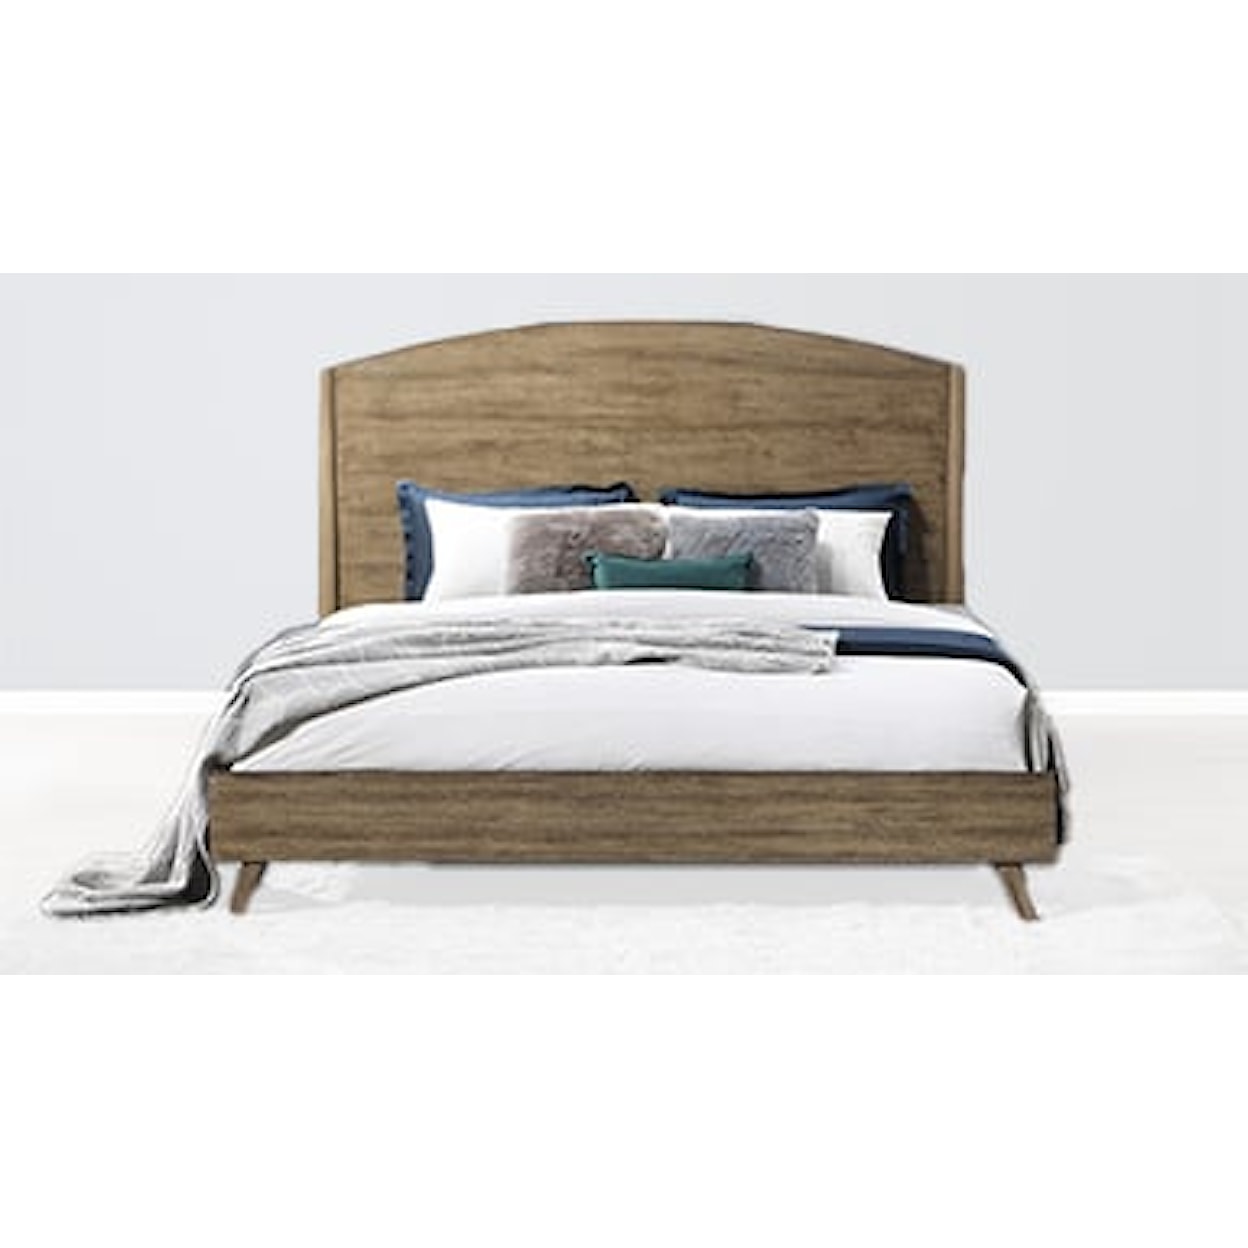 New Classic Rex California King Bed